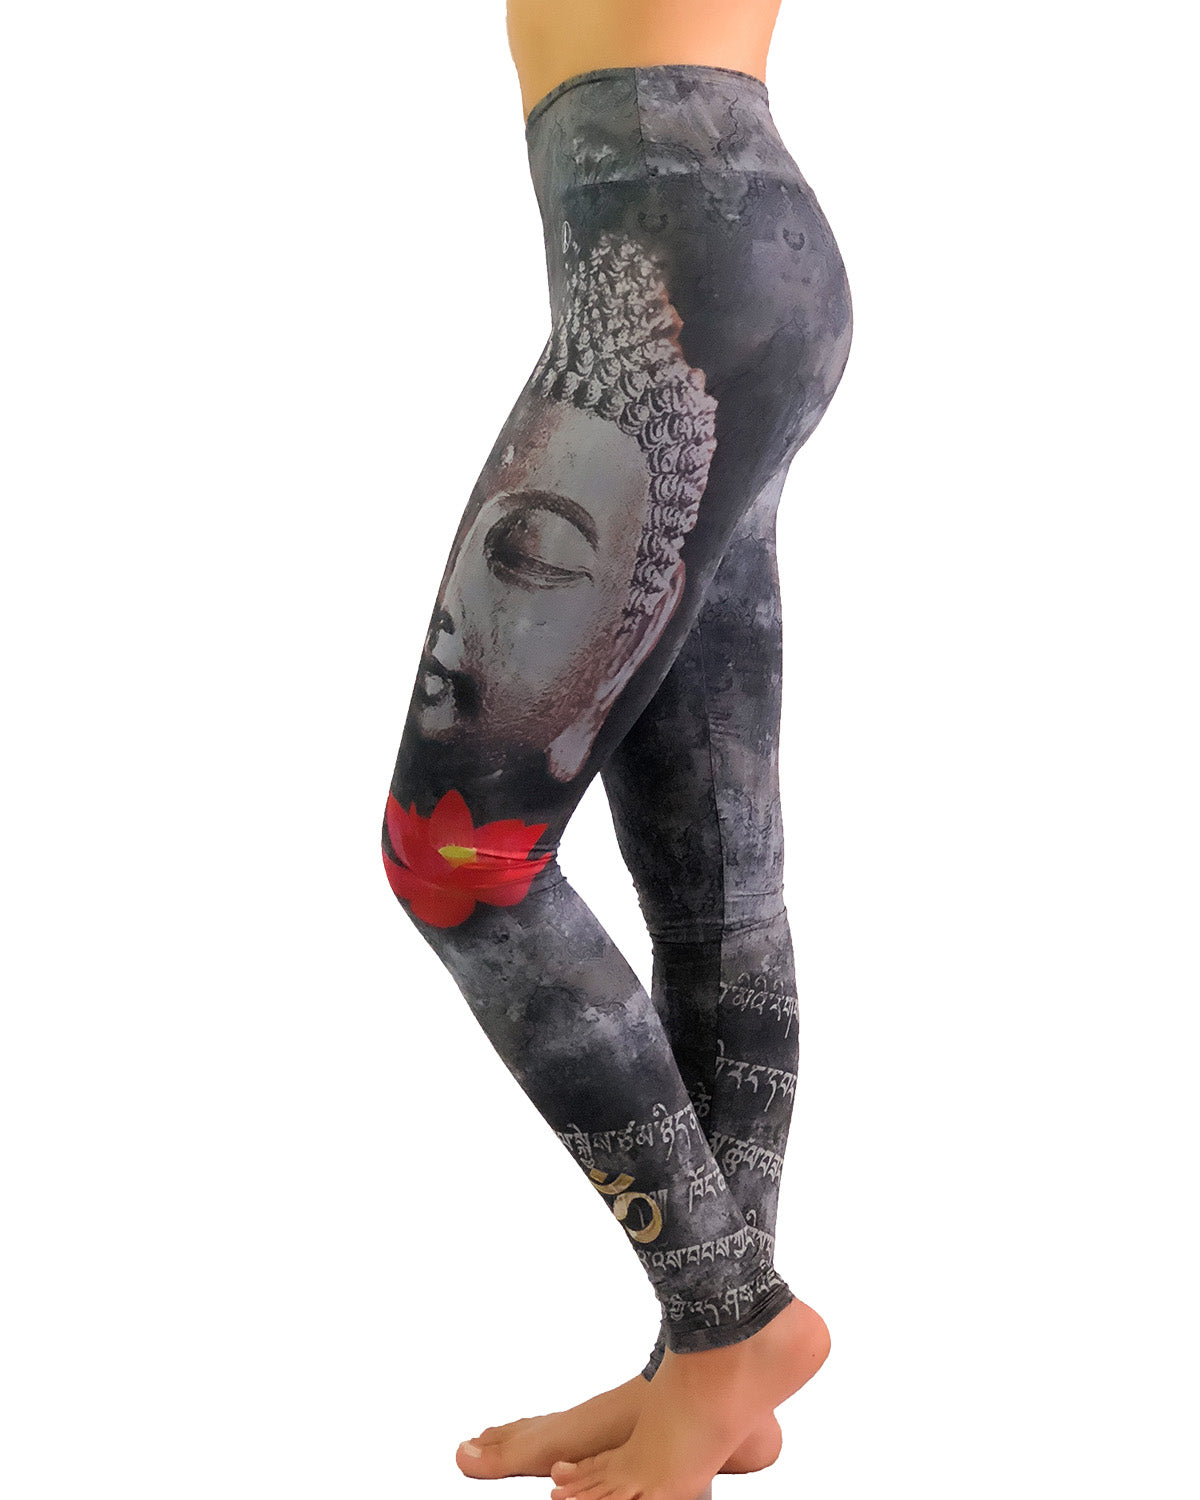 Stay Flex Legging with Pockets as comfortable as your favorite brand,  crafted sustainably and ethically with eco-friendly materials. – Rose Buddha